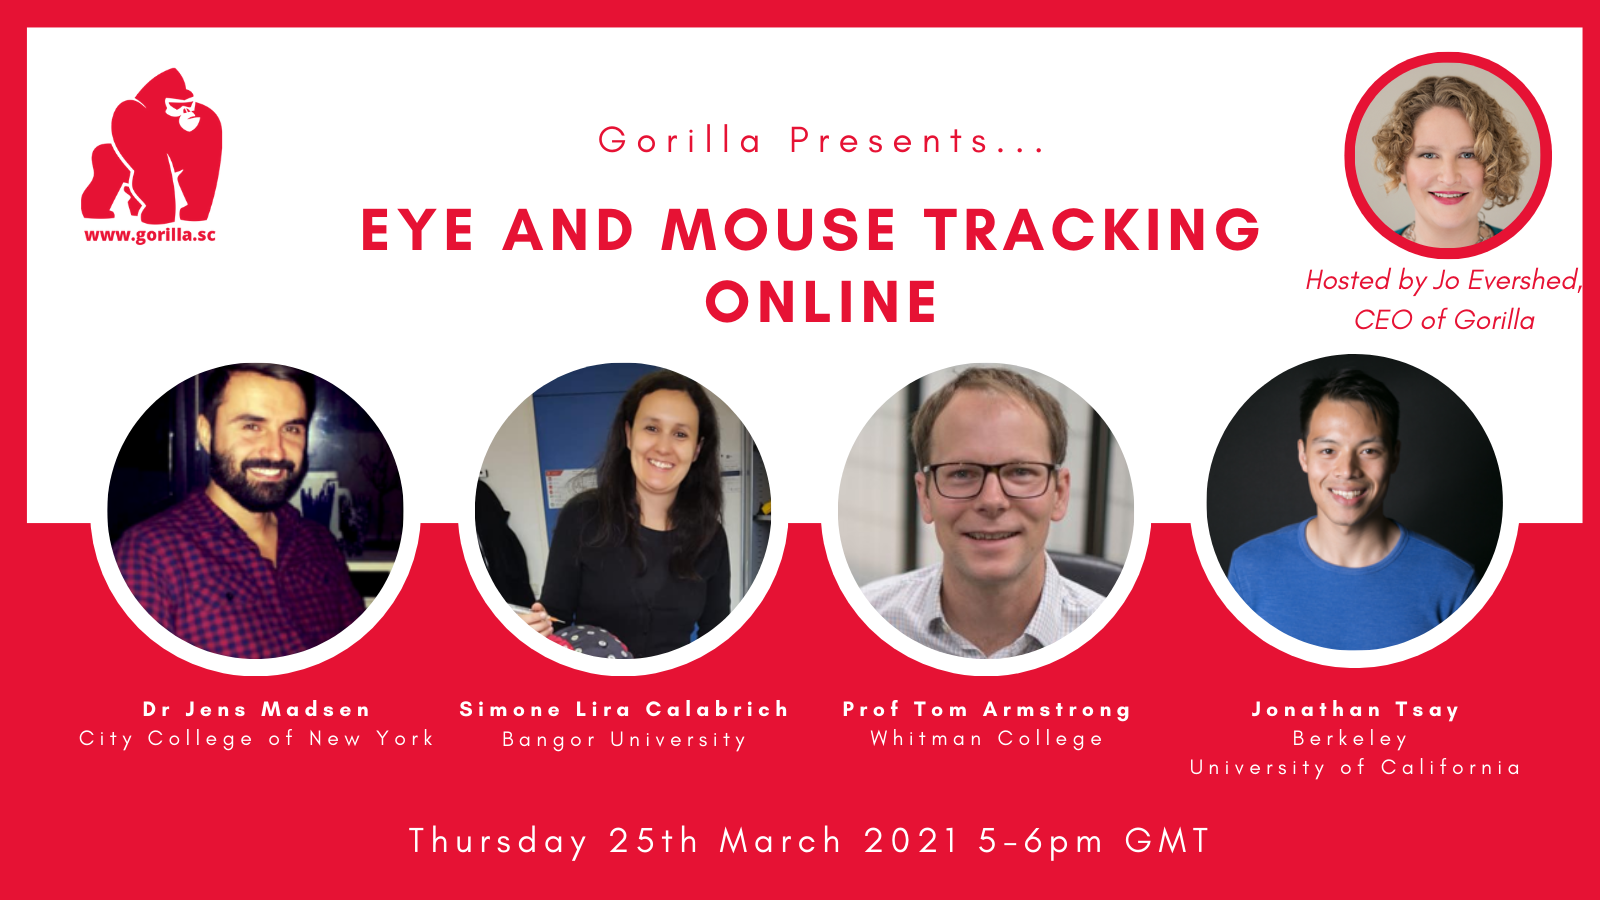 Gorilla Presents: Eye and Mouse Tracking Online